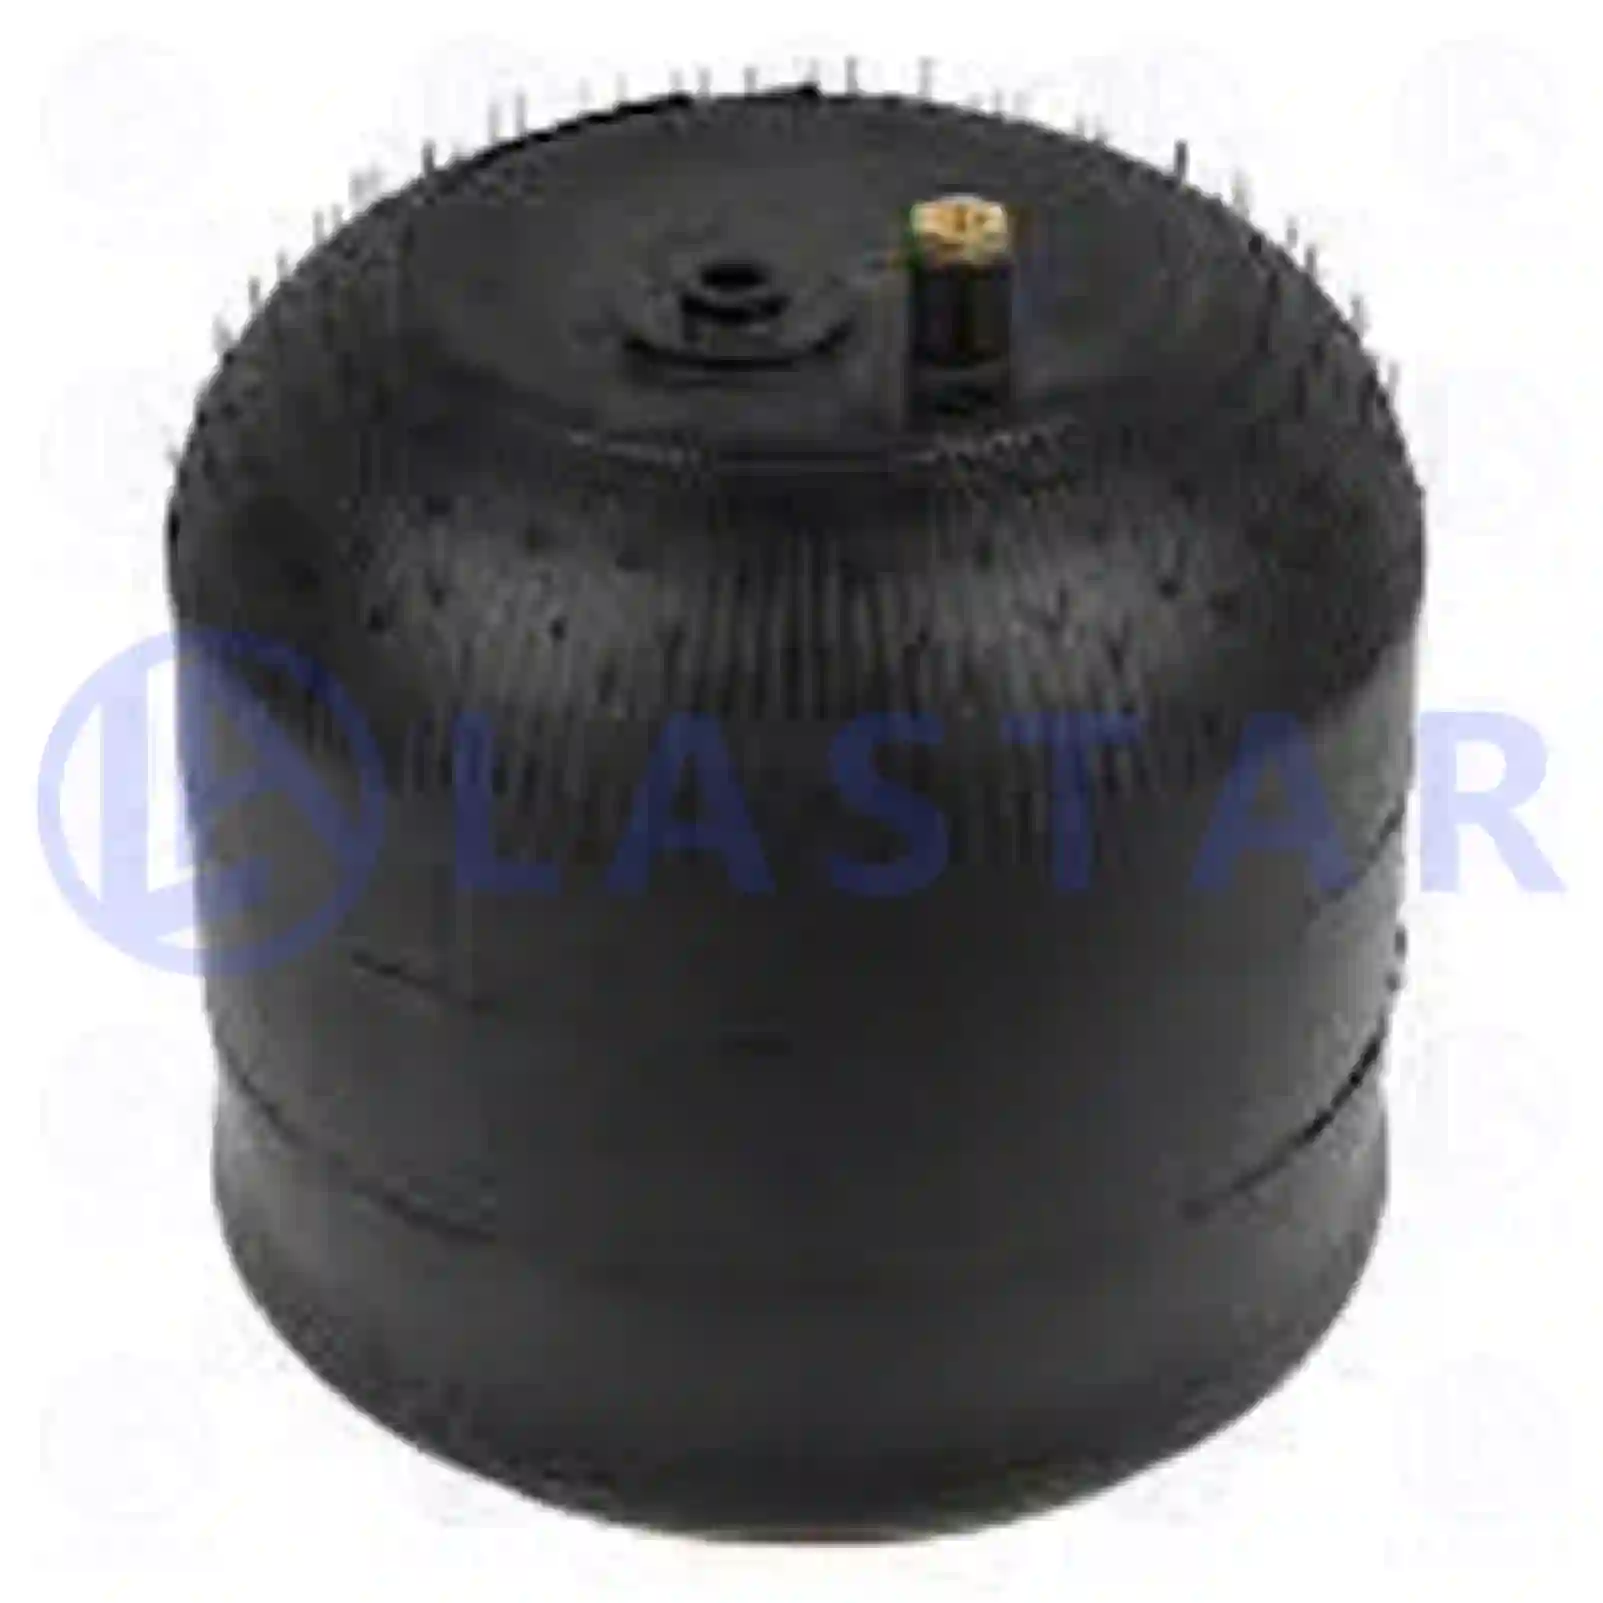 Air spring, with steel piston, 77728249, 9423201721, 9423202521, 9423207121 ||  77728249 Lastar Spare Part | Truck Spare Parts, Auotomotive Spare Parts Air spring, with steel piston, 77728249, 9423201721, 9423202521, 9423207121 ||  77728249 Lastar Spare Part | Truck Spare Parts, Auotomotive Spare Parts